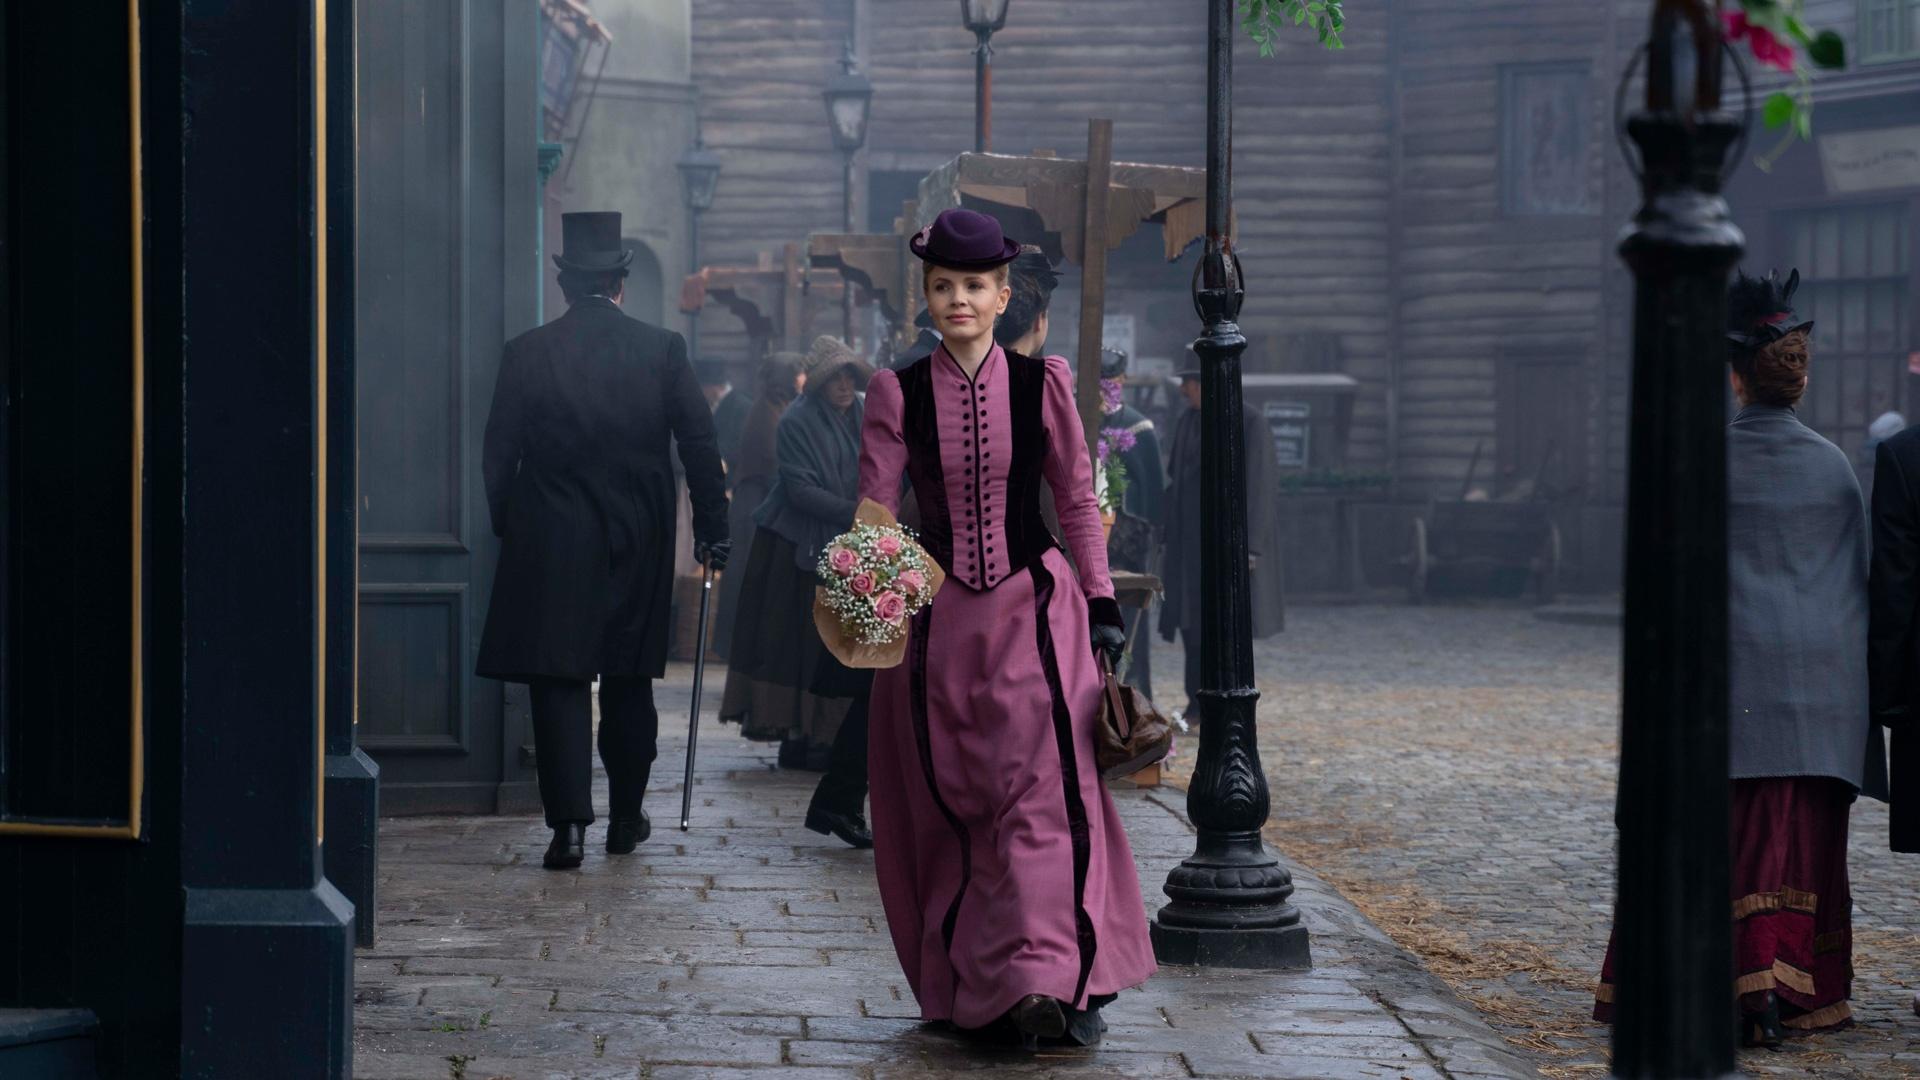 Miss Scarlet walking down a cobbelstone stree well dress with pink flowers, others are around, but there is drama afoot